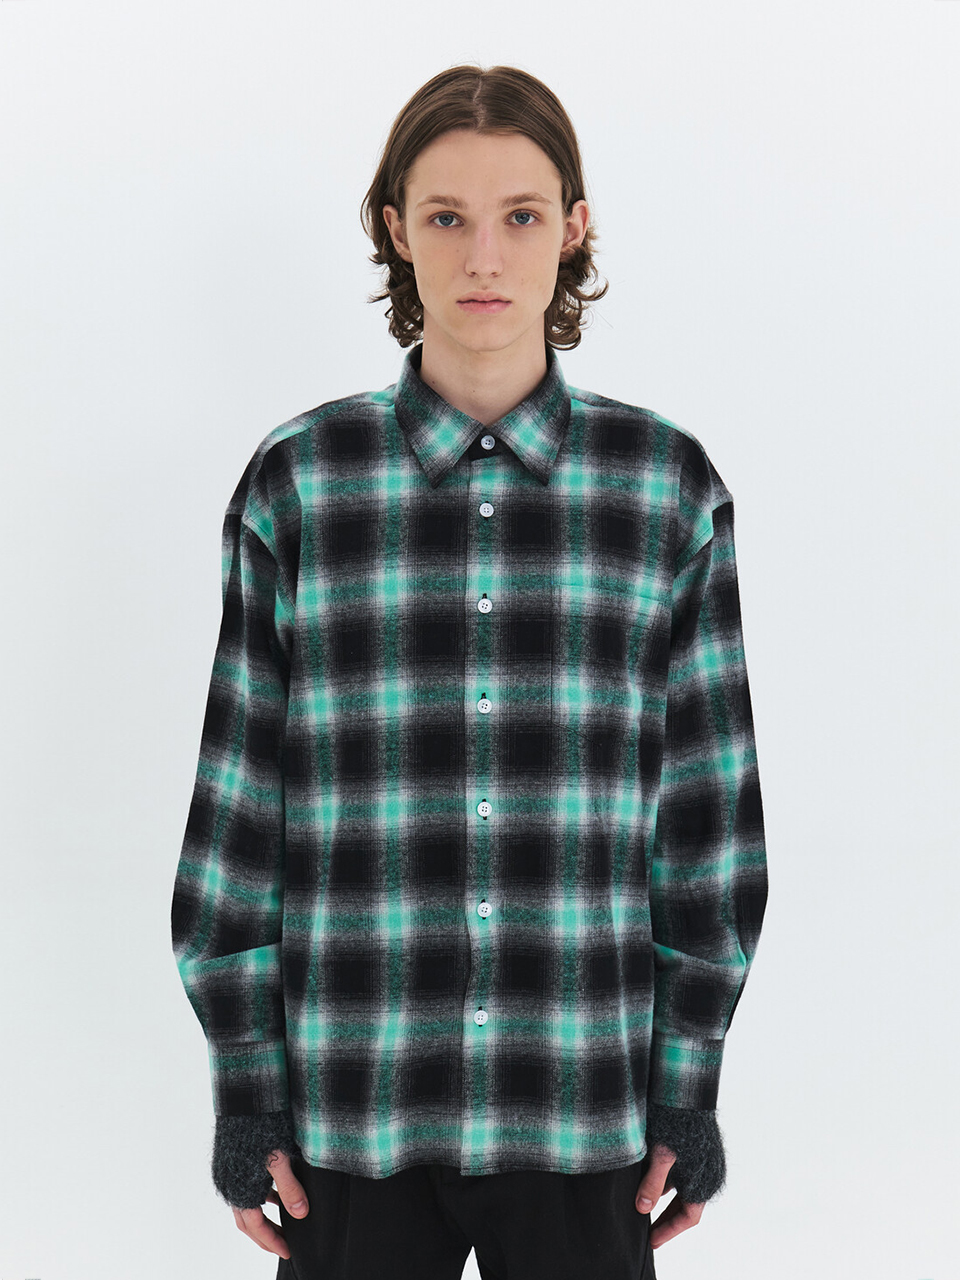 WINDER - OMBRER COTTON FLANNEL CHECK SHIRTS (MINT)